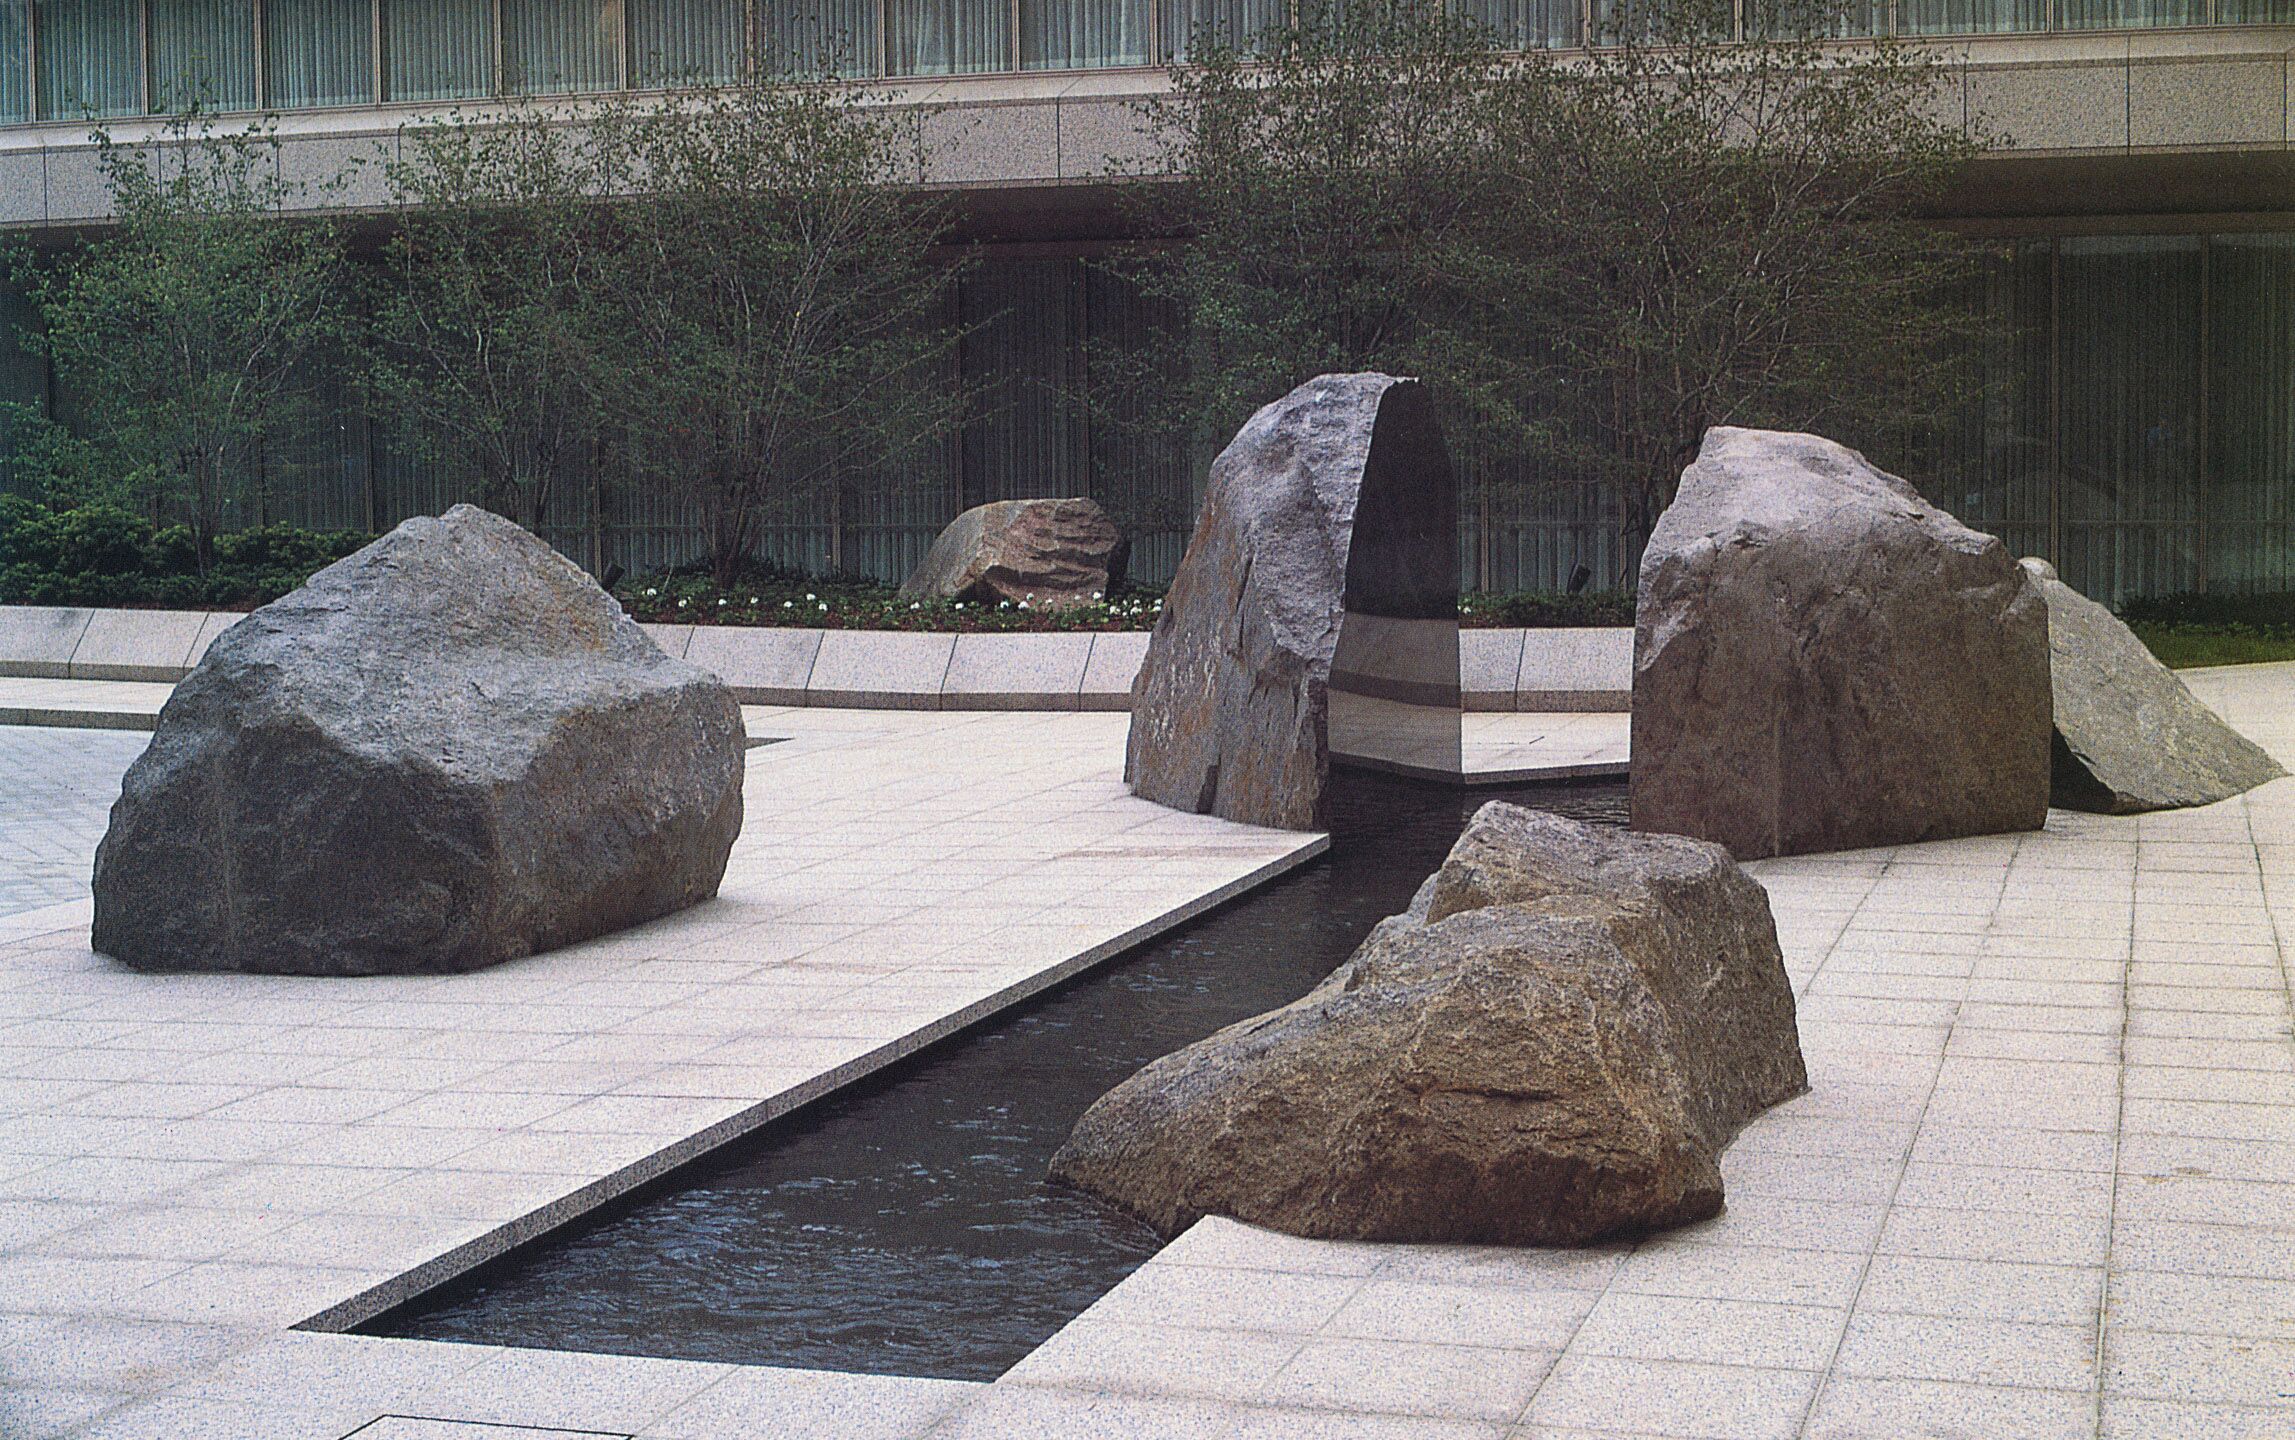 Rocks surrounding a water feature